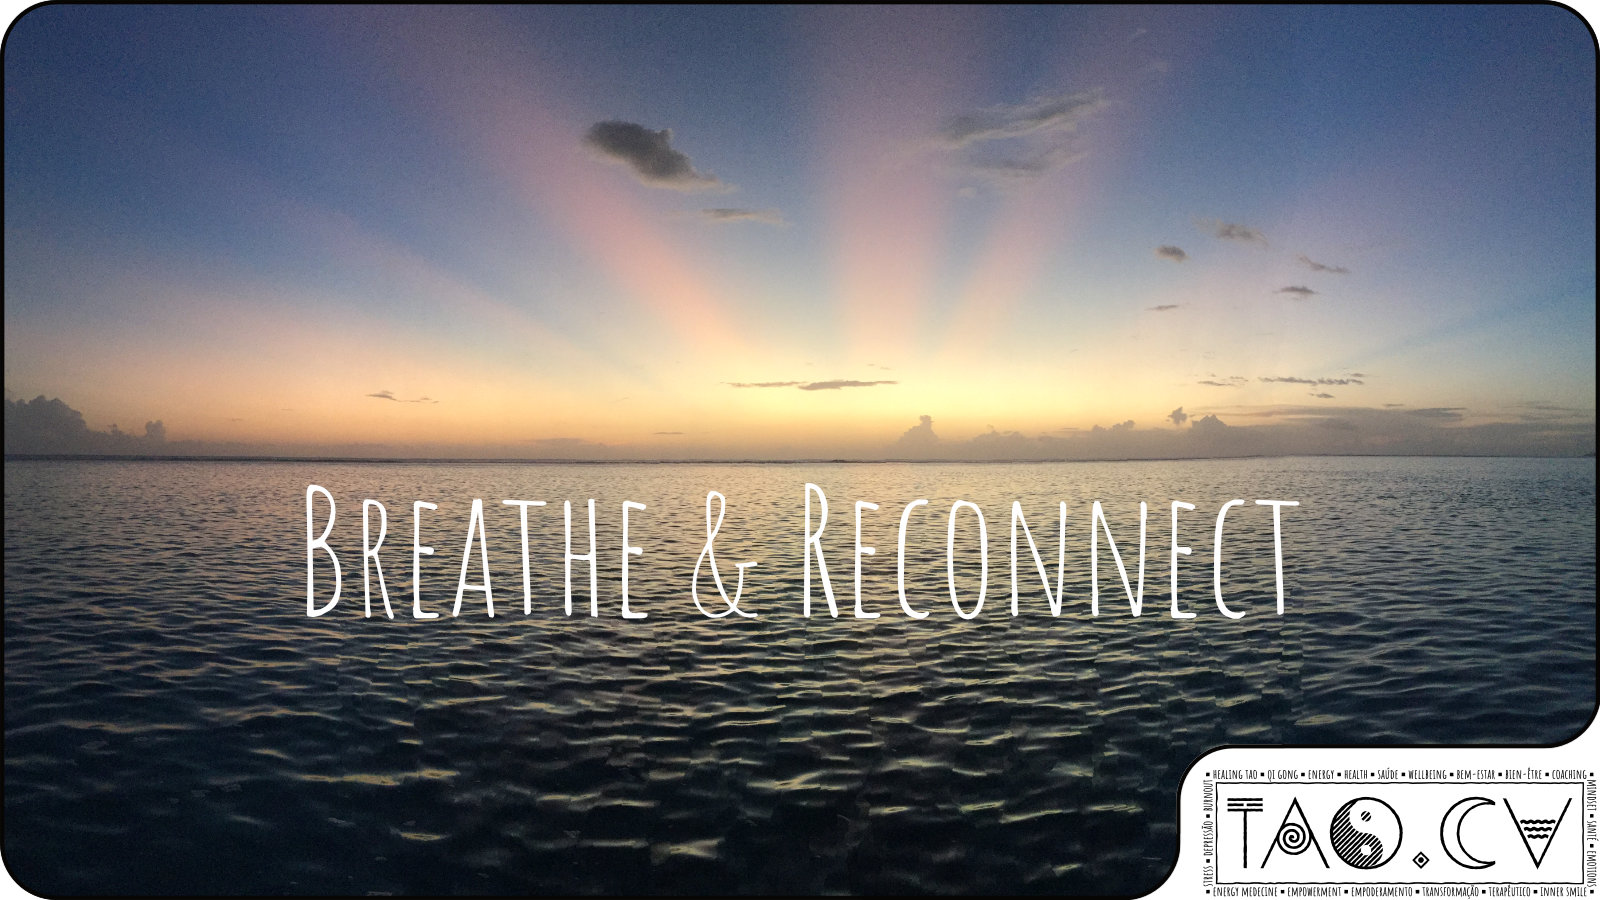 Breath & Reconnect